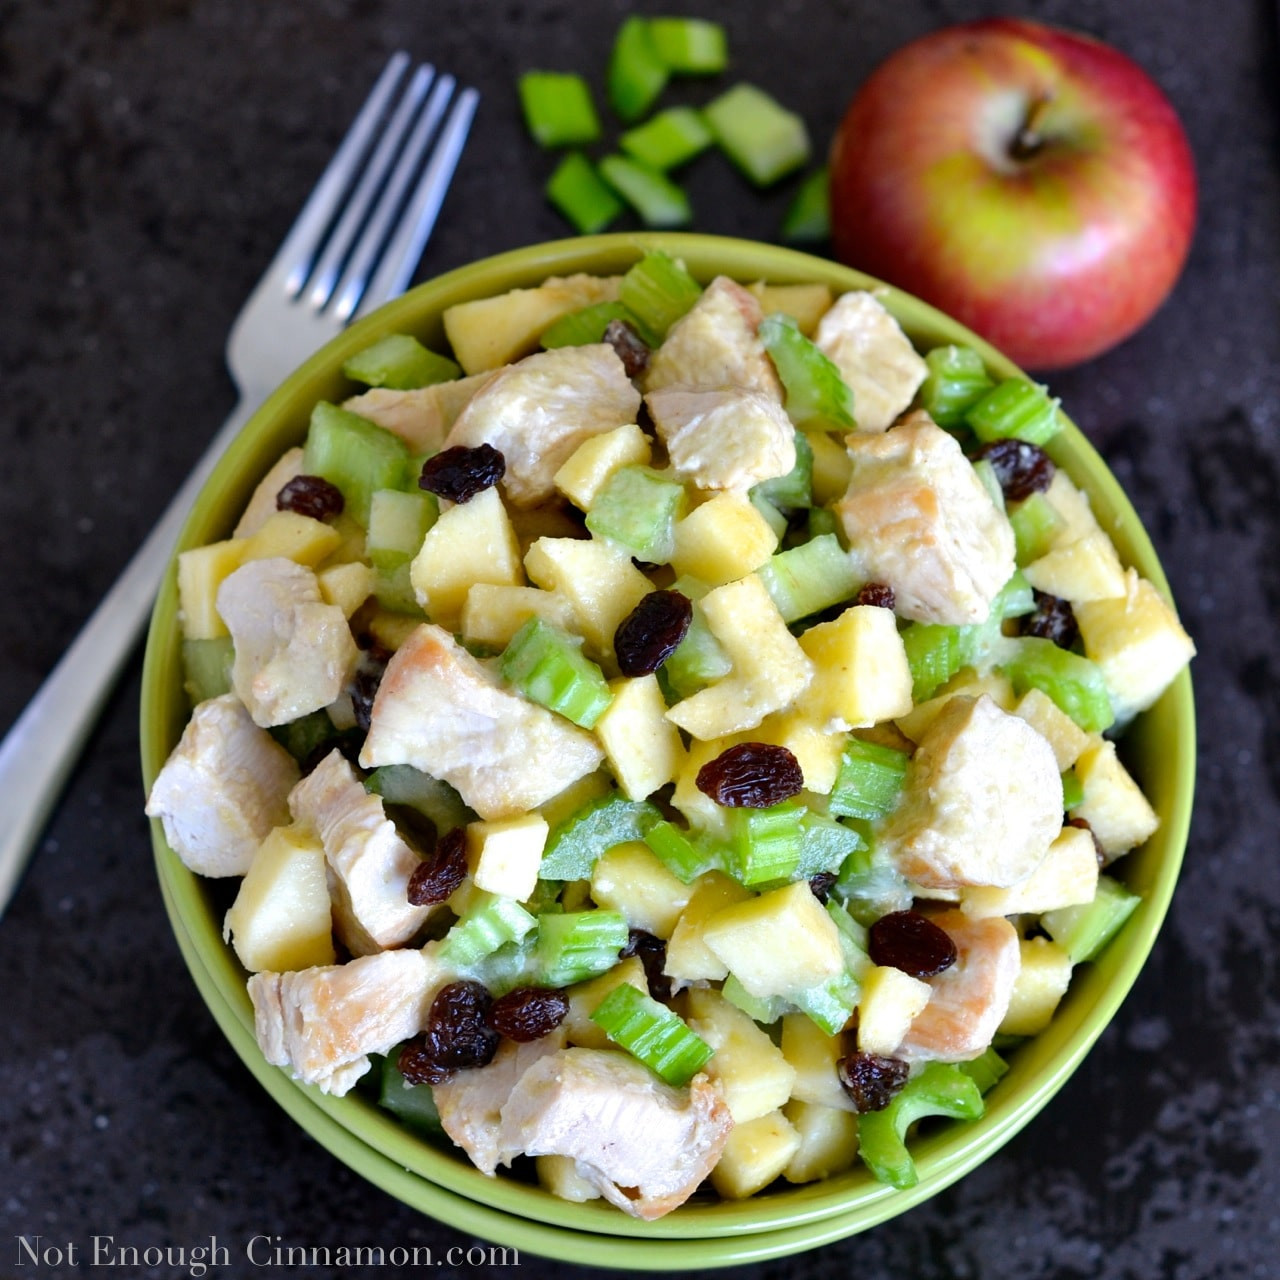 Chicken Salad With Apples
 Apple and Celery Chicken Salad Not Enough Cinnamon